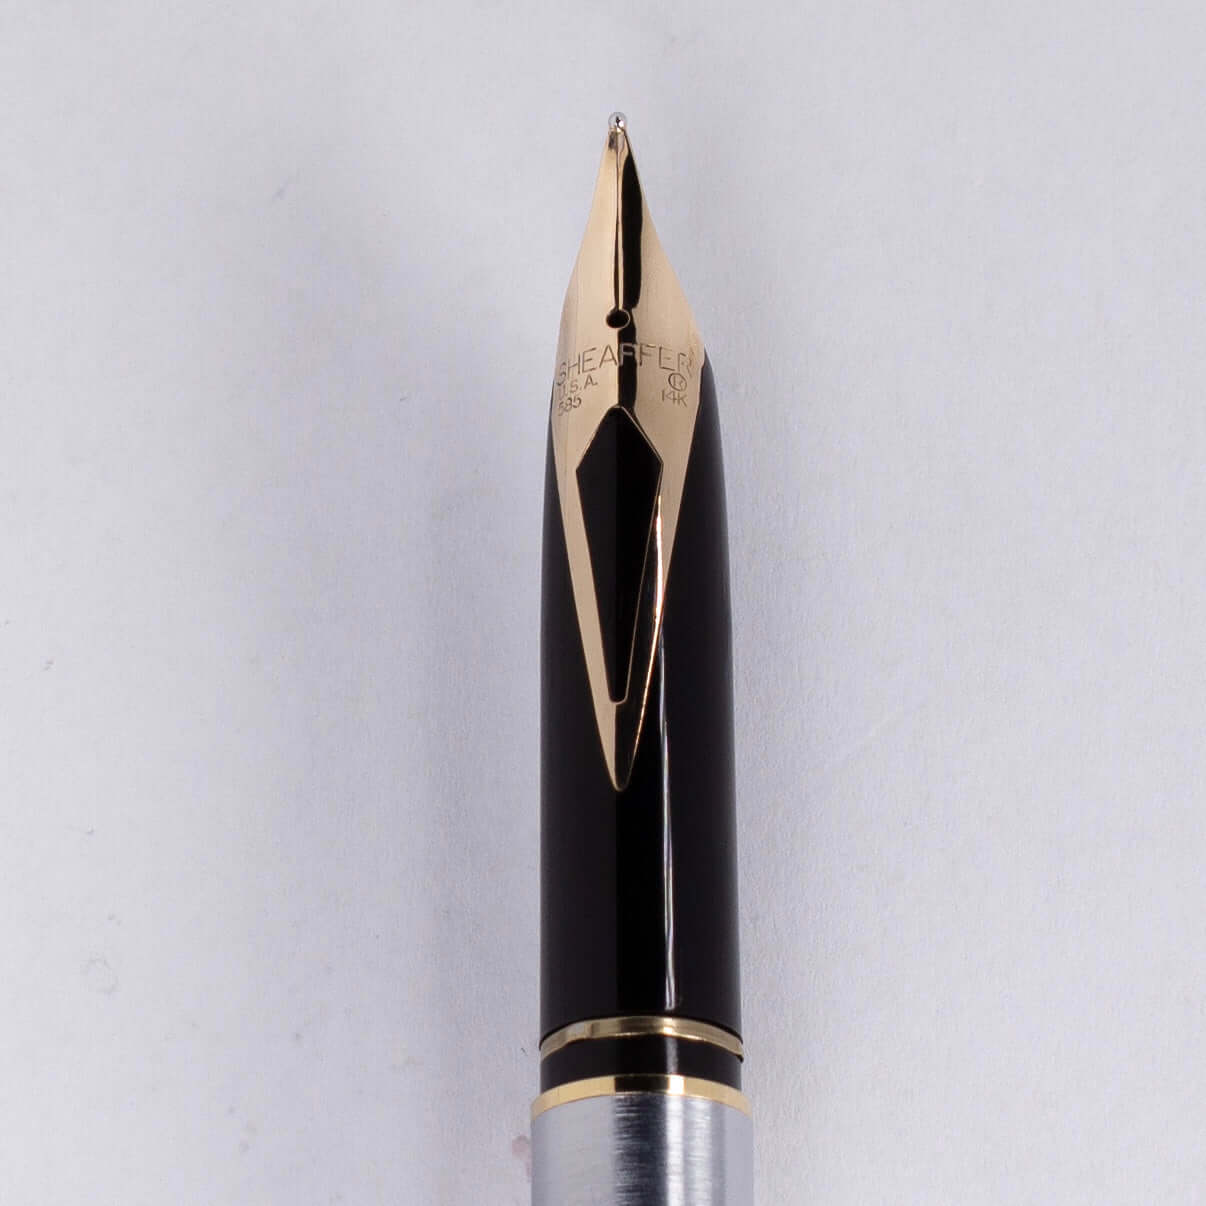 ${titleName/Type: Sheaffer Slim Targa Manufacture Year: 1980s Length: 5 3/8 Filling System: It takes Slim Sheaffer-style cartridges or converters. The original squeeze converter is included. Color/Pattern: Brushed chrome finish. 23K electroplate trim and